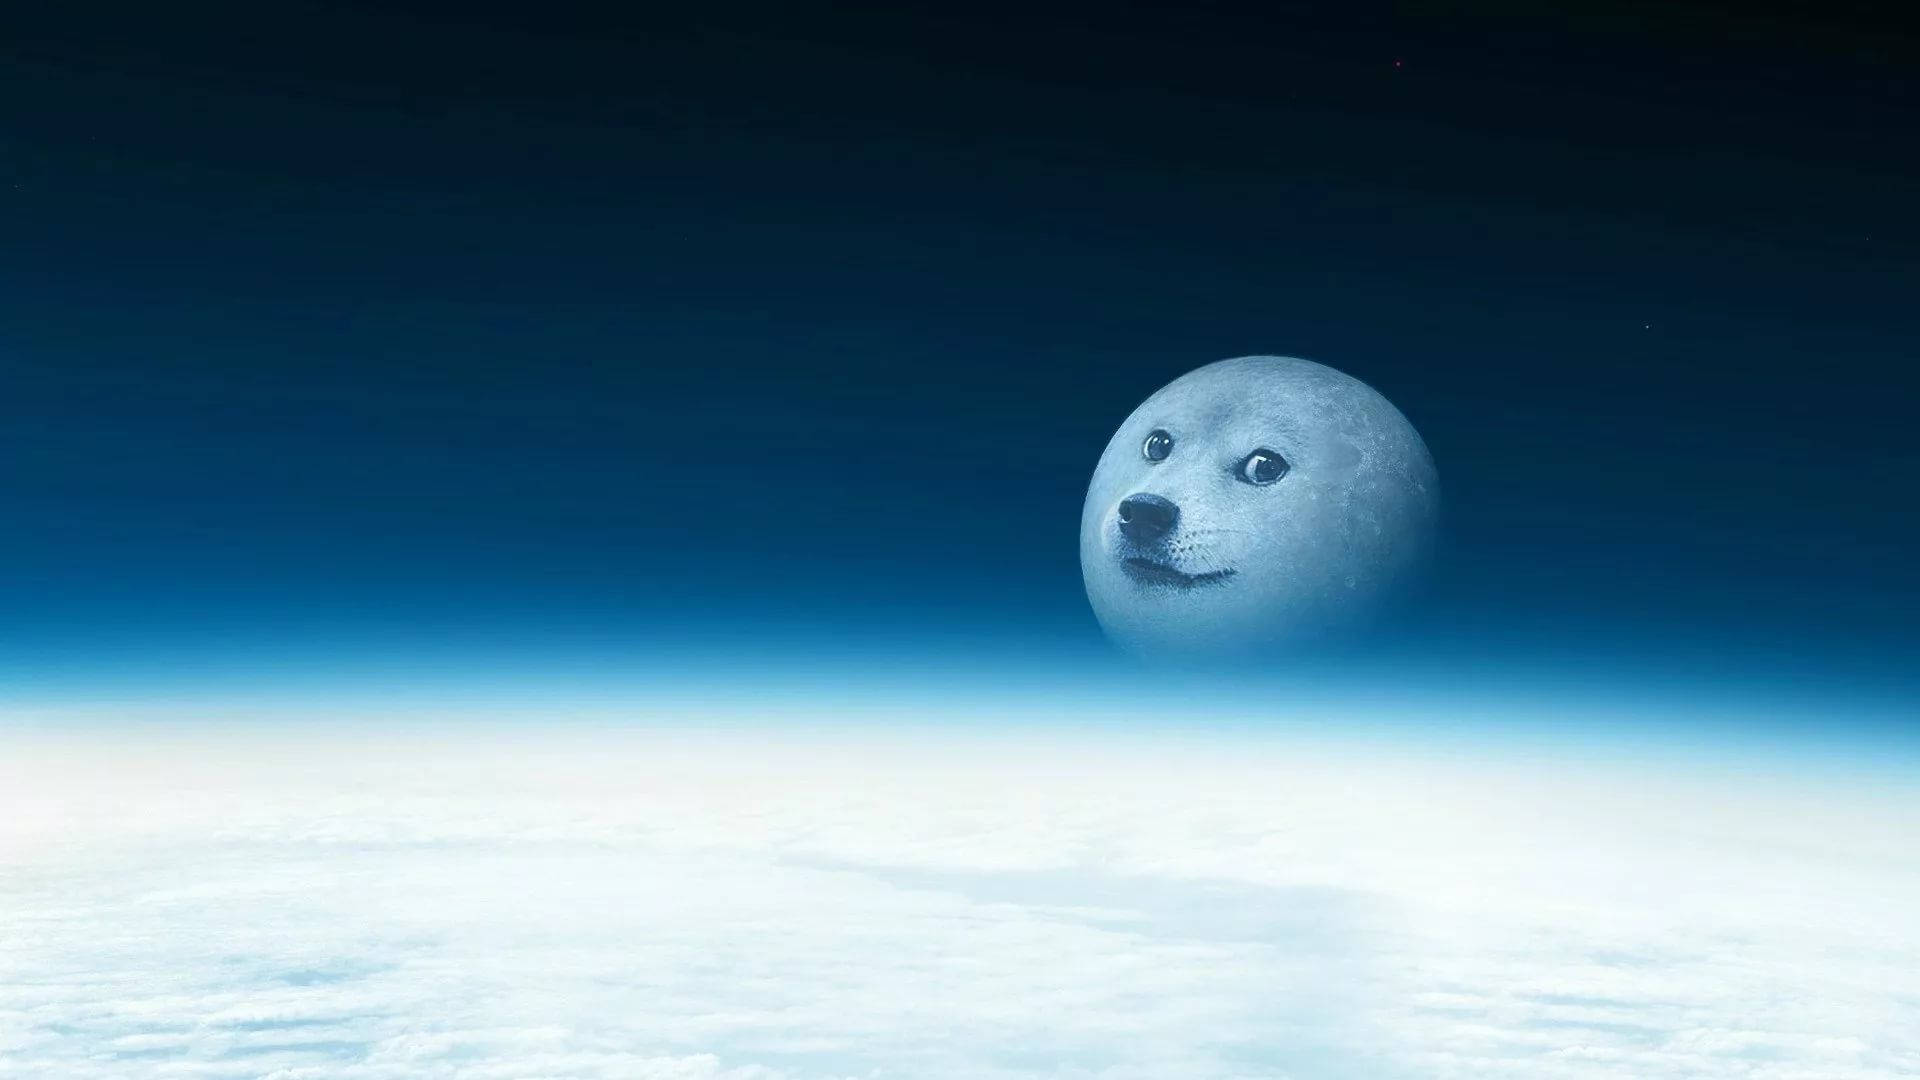 Doge's face on the moon, making you think about dog memes at night.